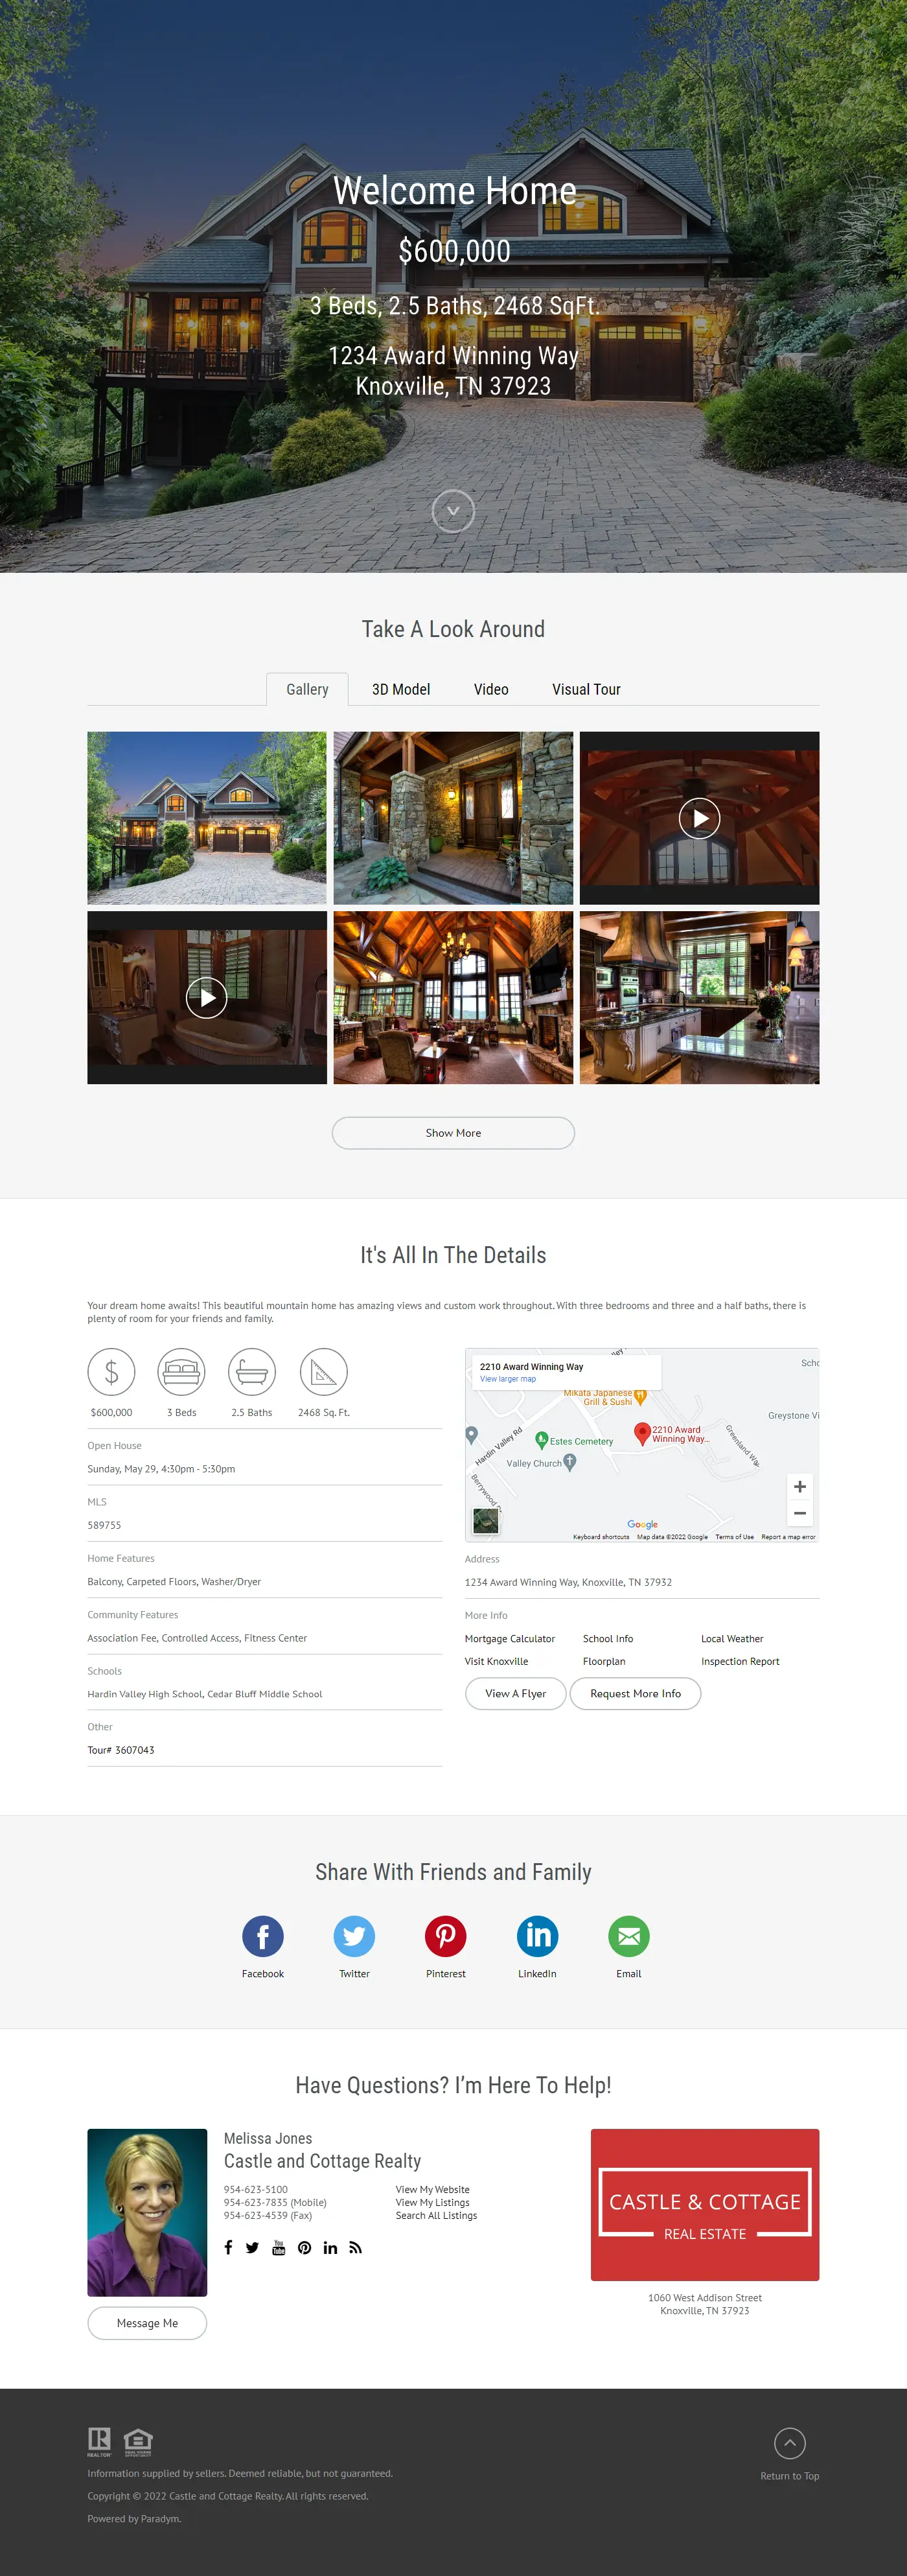 An example of a Visual Tour with slideshow, galleries, and property details.